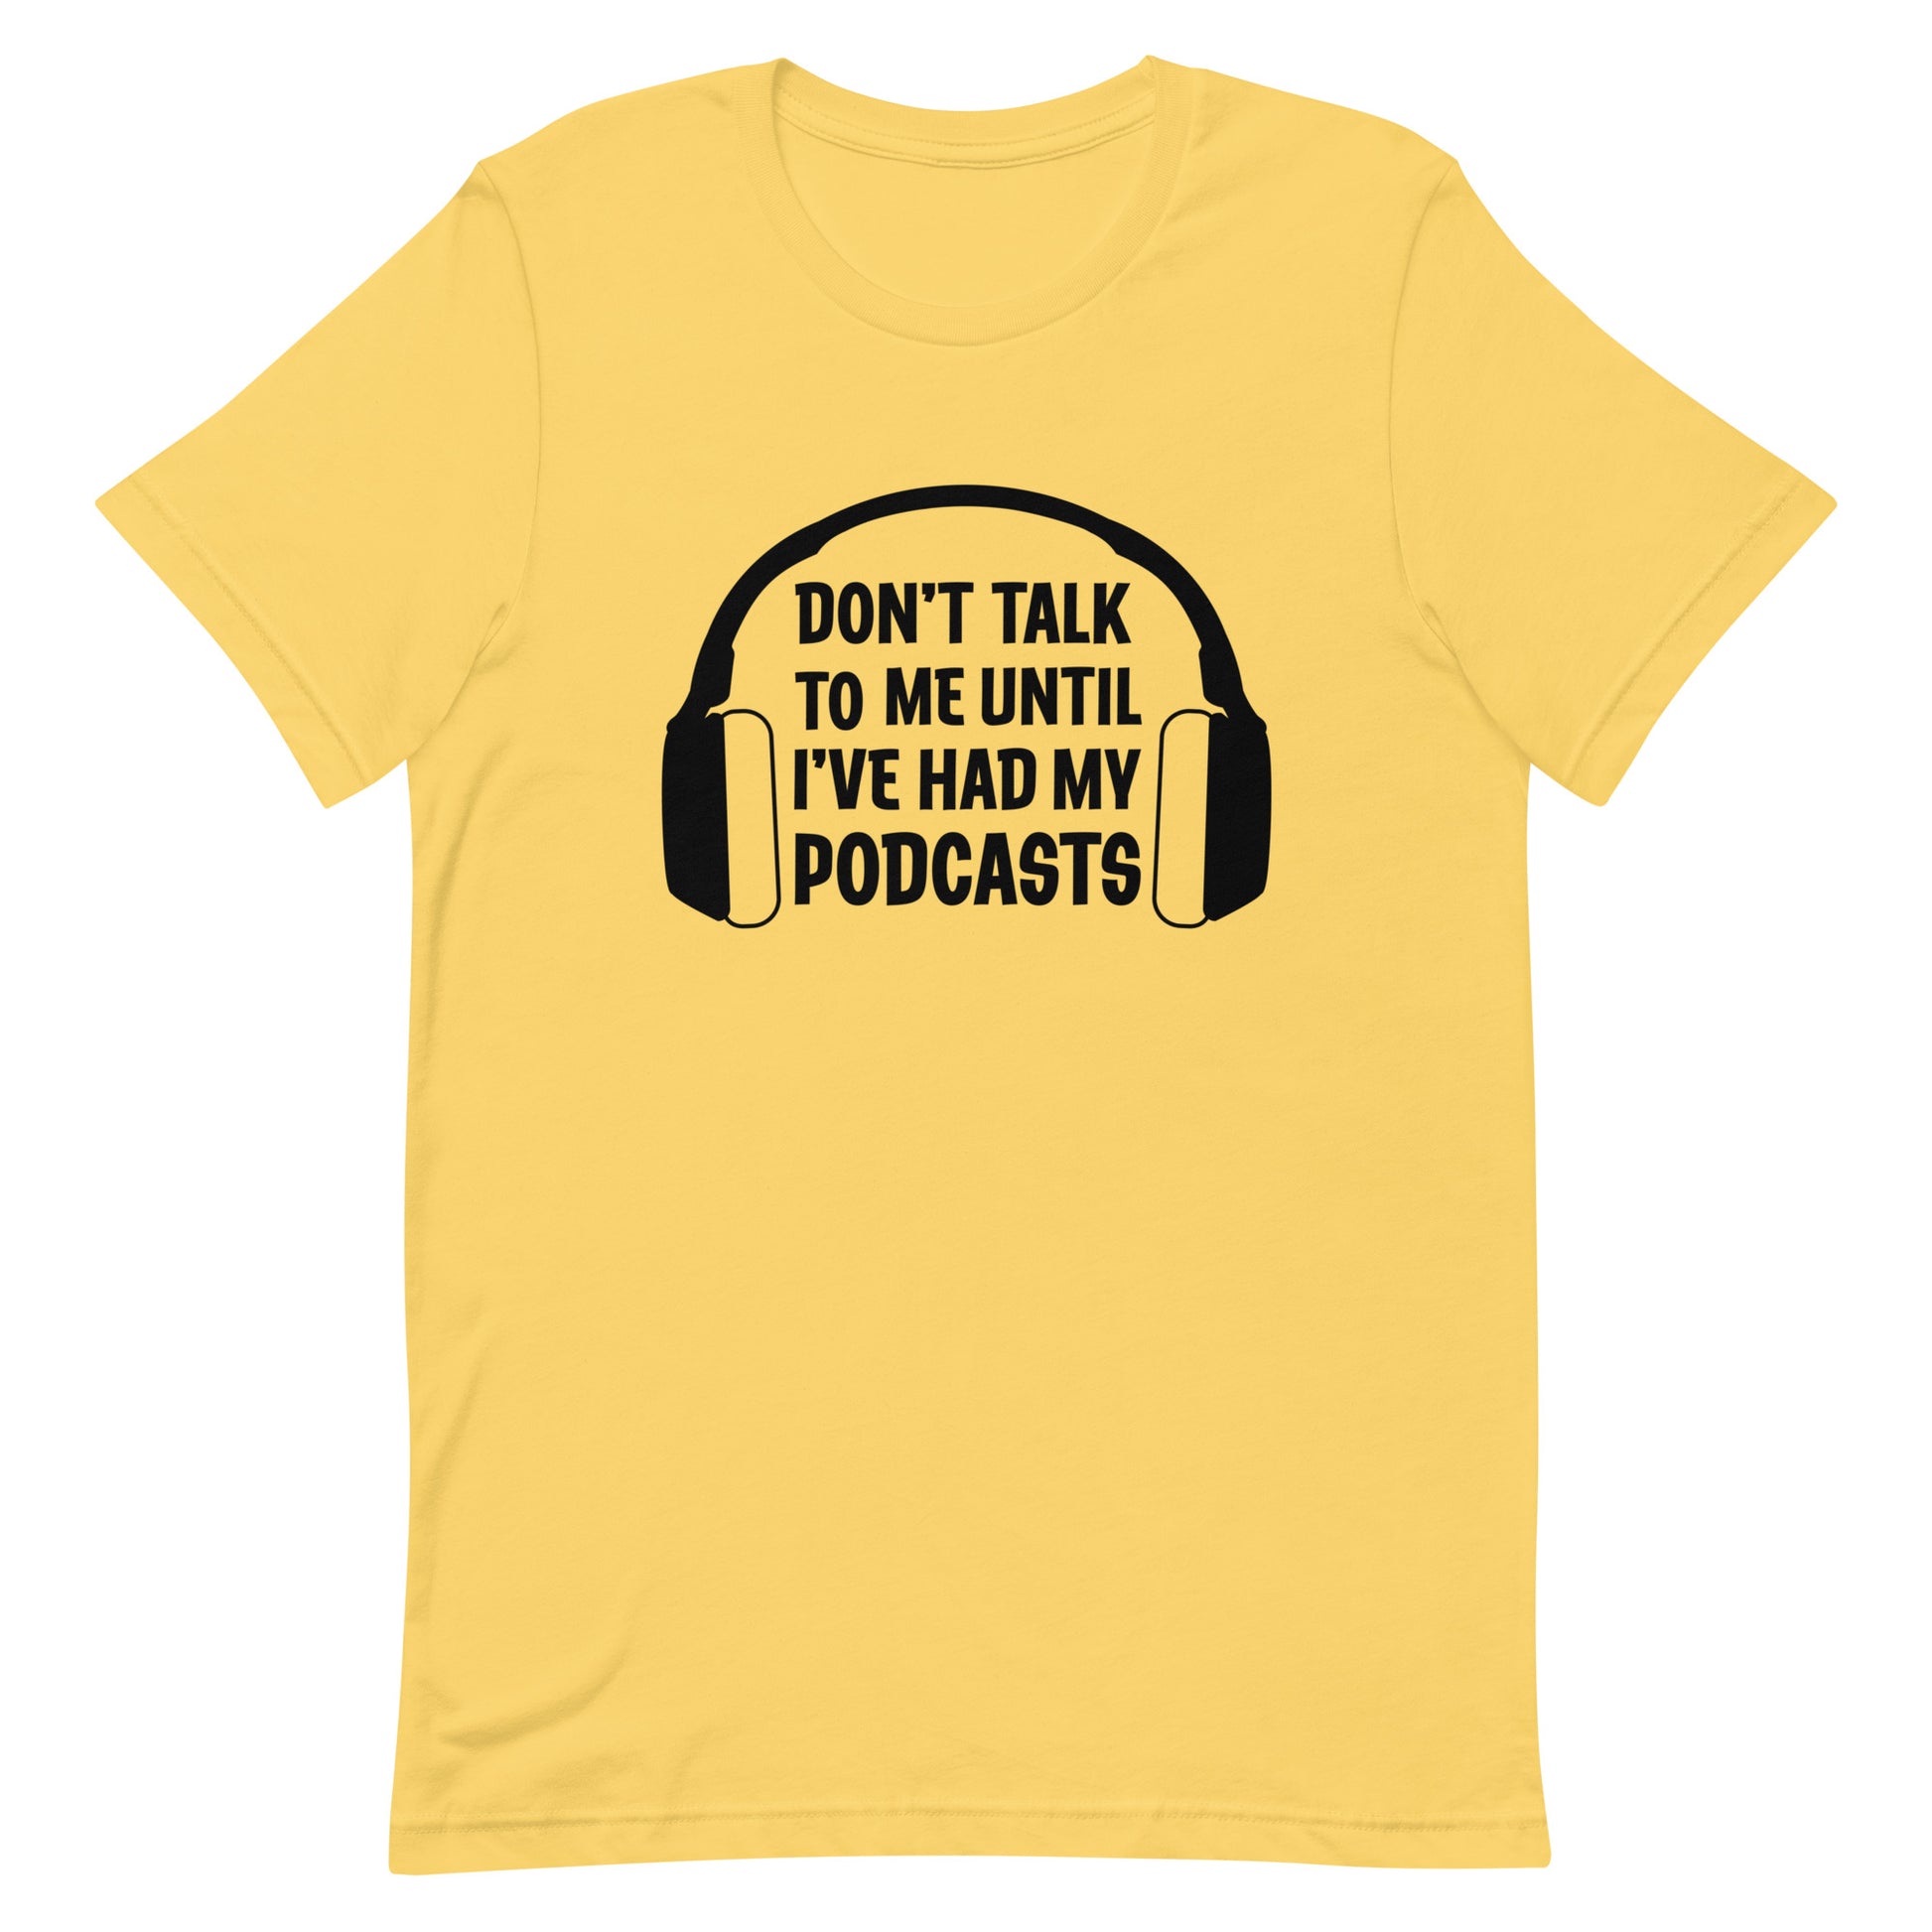 A yellow crewneck t-shirt featuring an image of headphones surrounding text reading "Don't talk to me until I've had my podcasts"